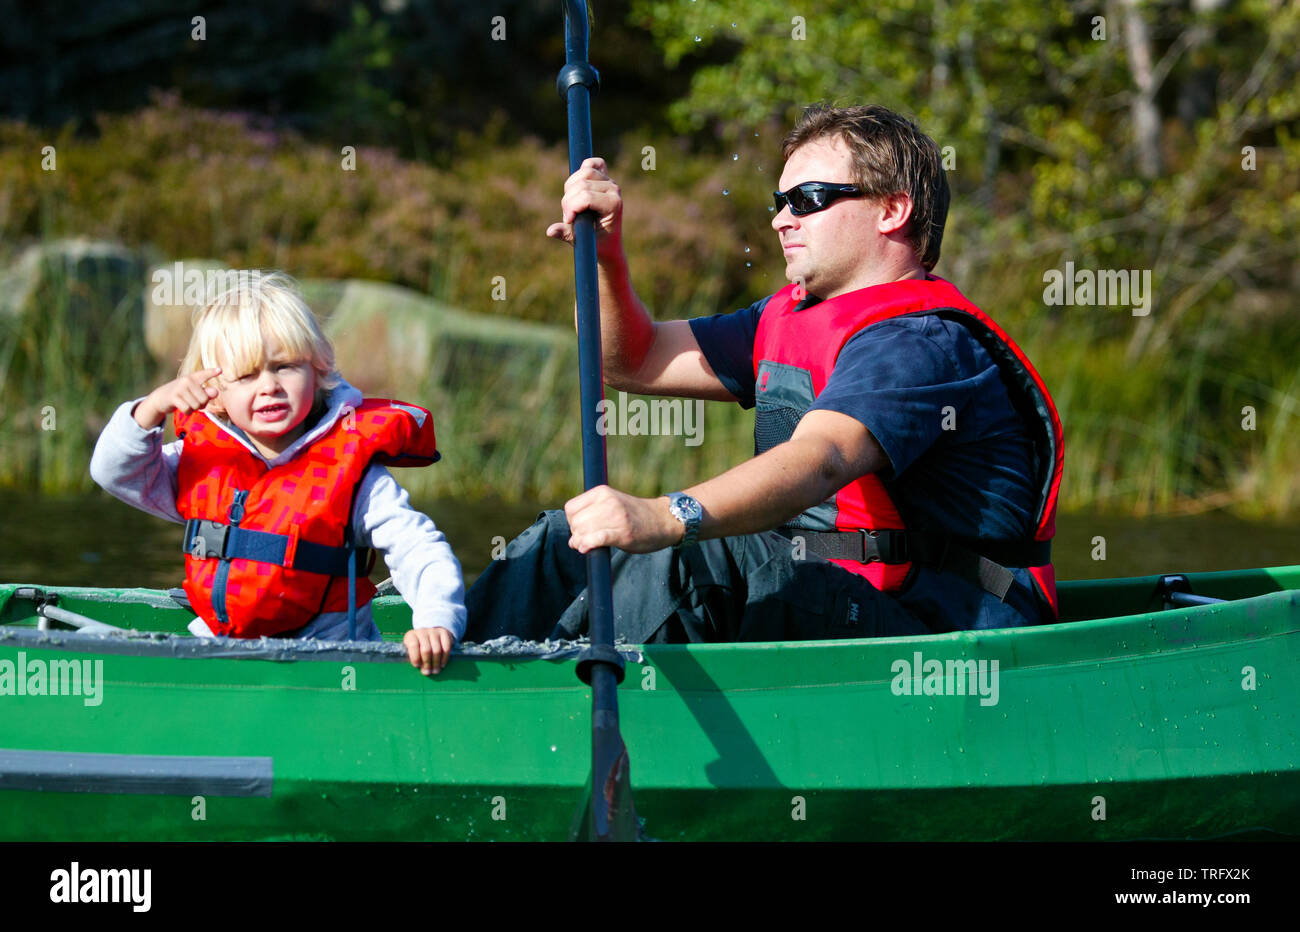 Father and son in a canoe on the lake Vansjø in Østfold, Norway. Vansjø is the largest lake in Østfold. The lake Vansjø and its surrounding lakes and rivers are a part of the water system called Morsavassdraget. September, 2006. Stock Photo